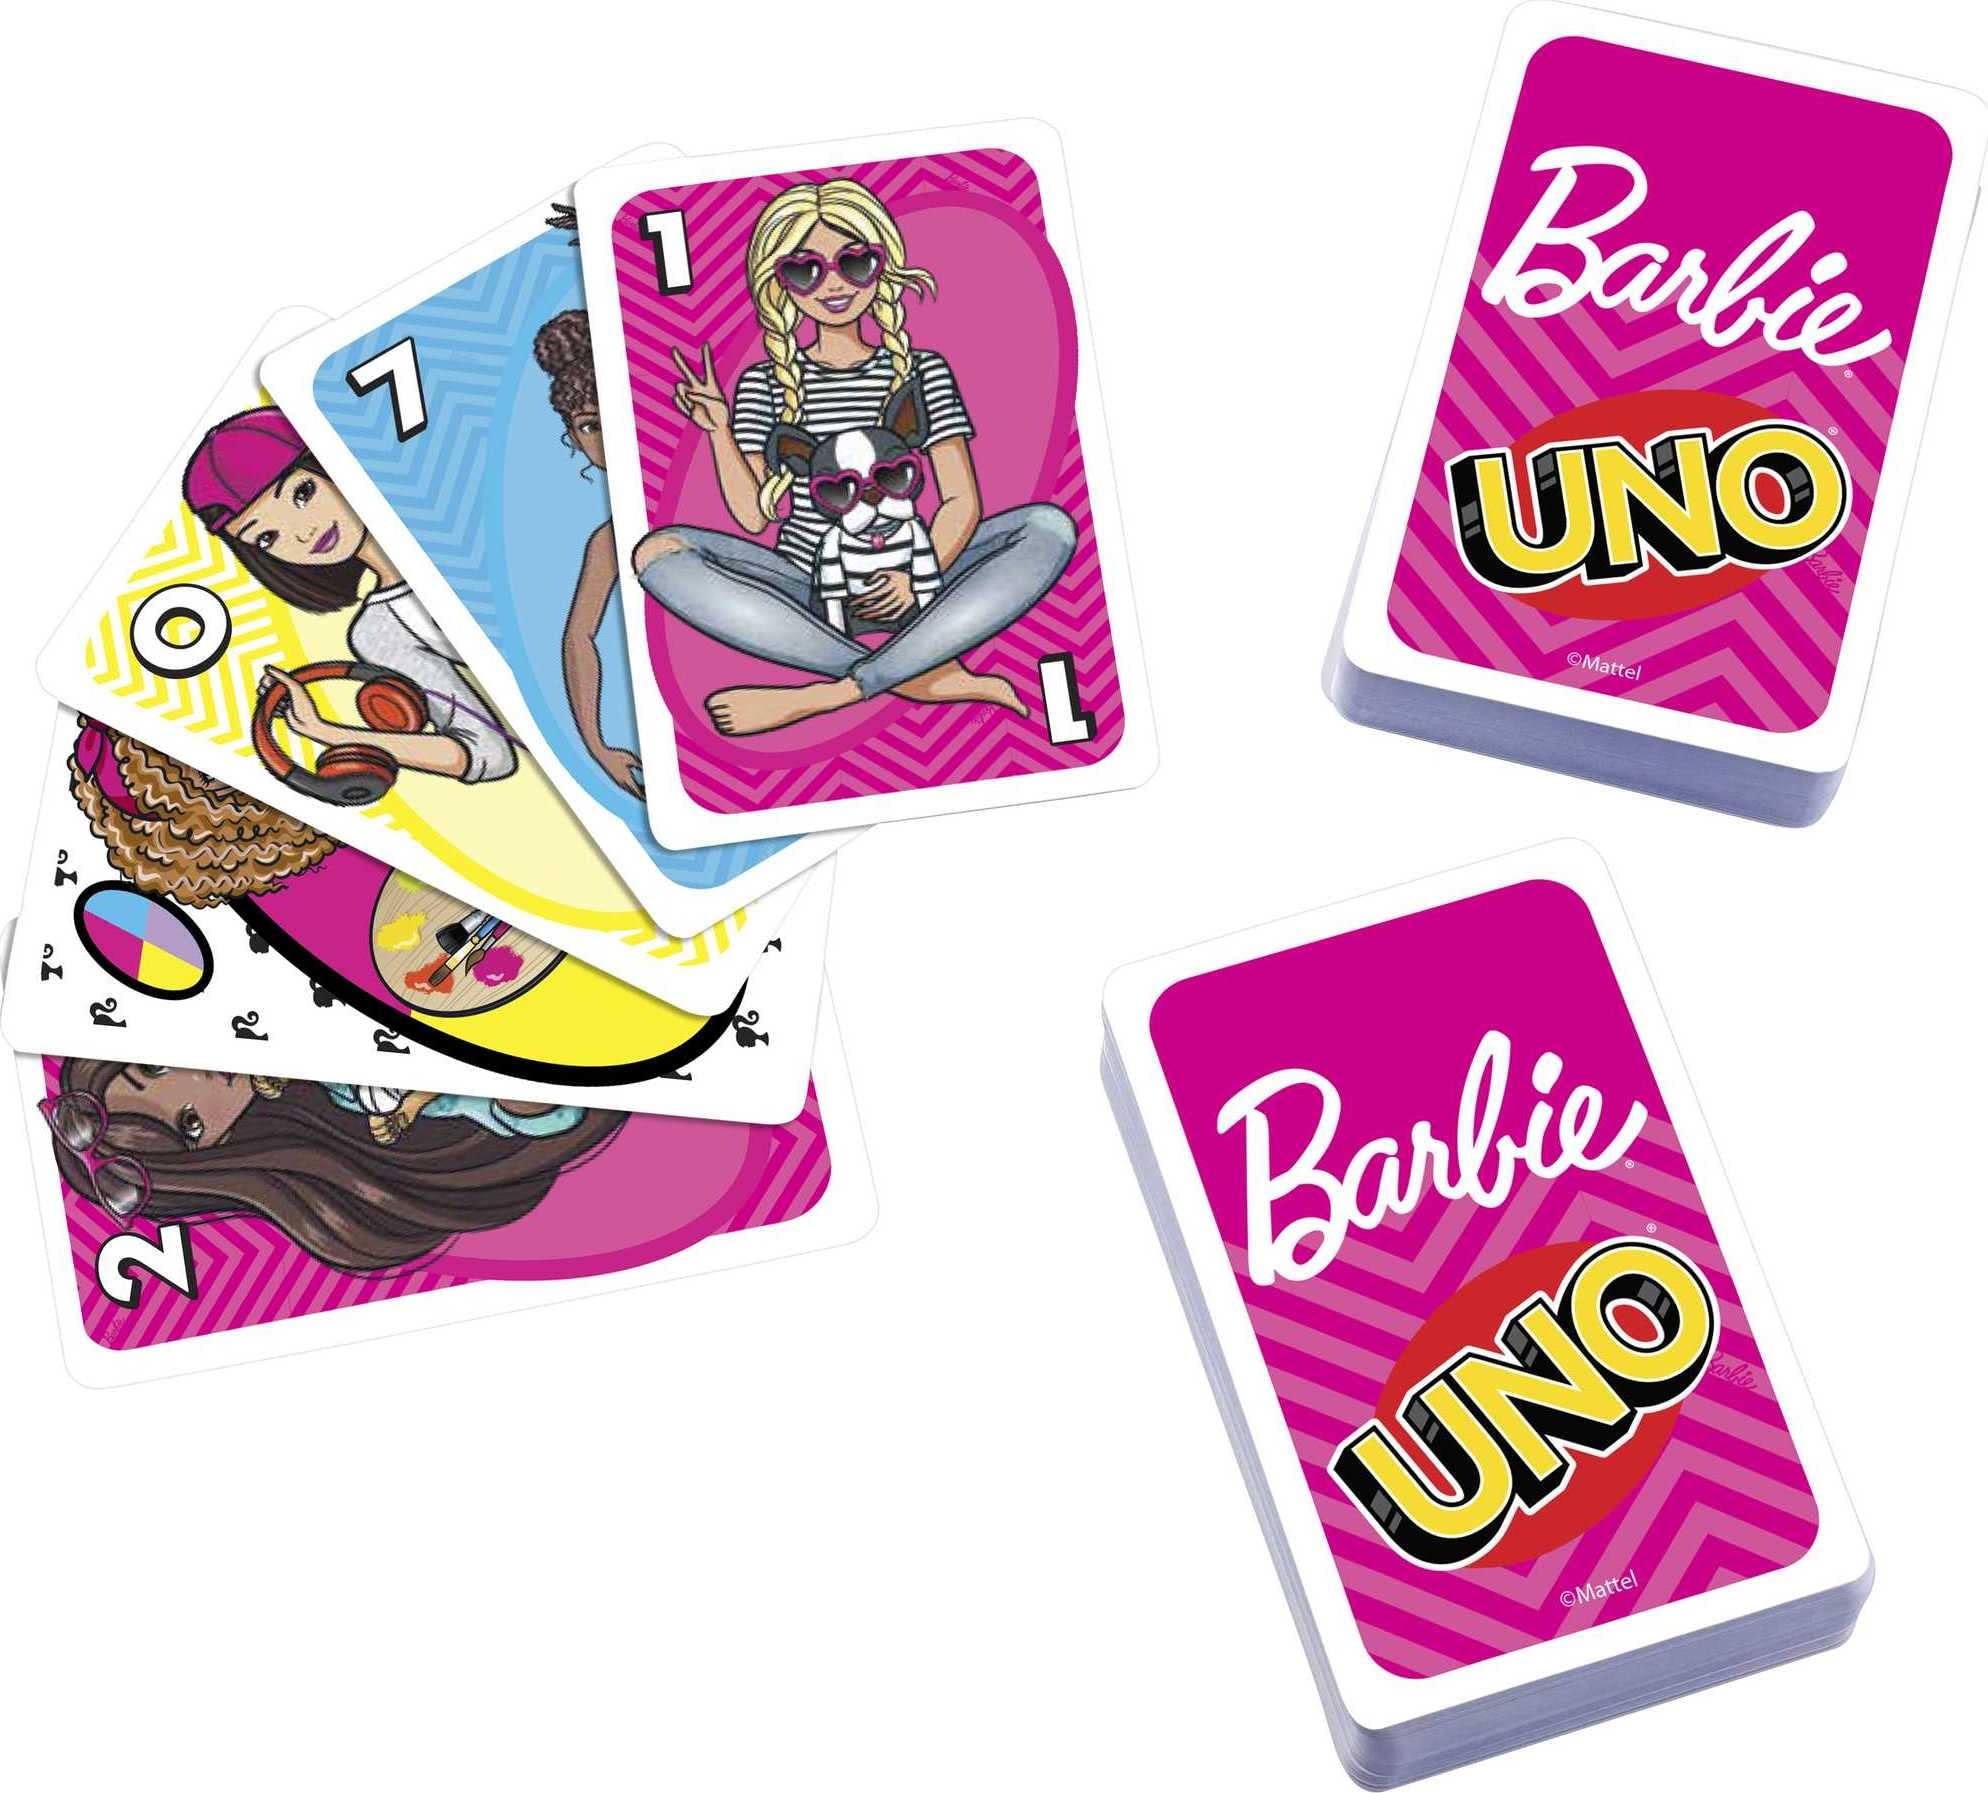 Barbie UNO Card Game for Family Night, Travel Game Featuring Barbie Graphics & Special Rule for 2-10 Players